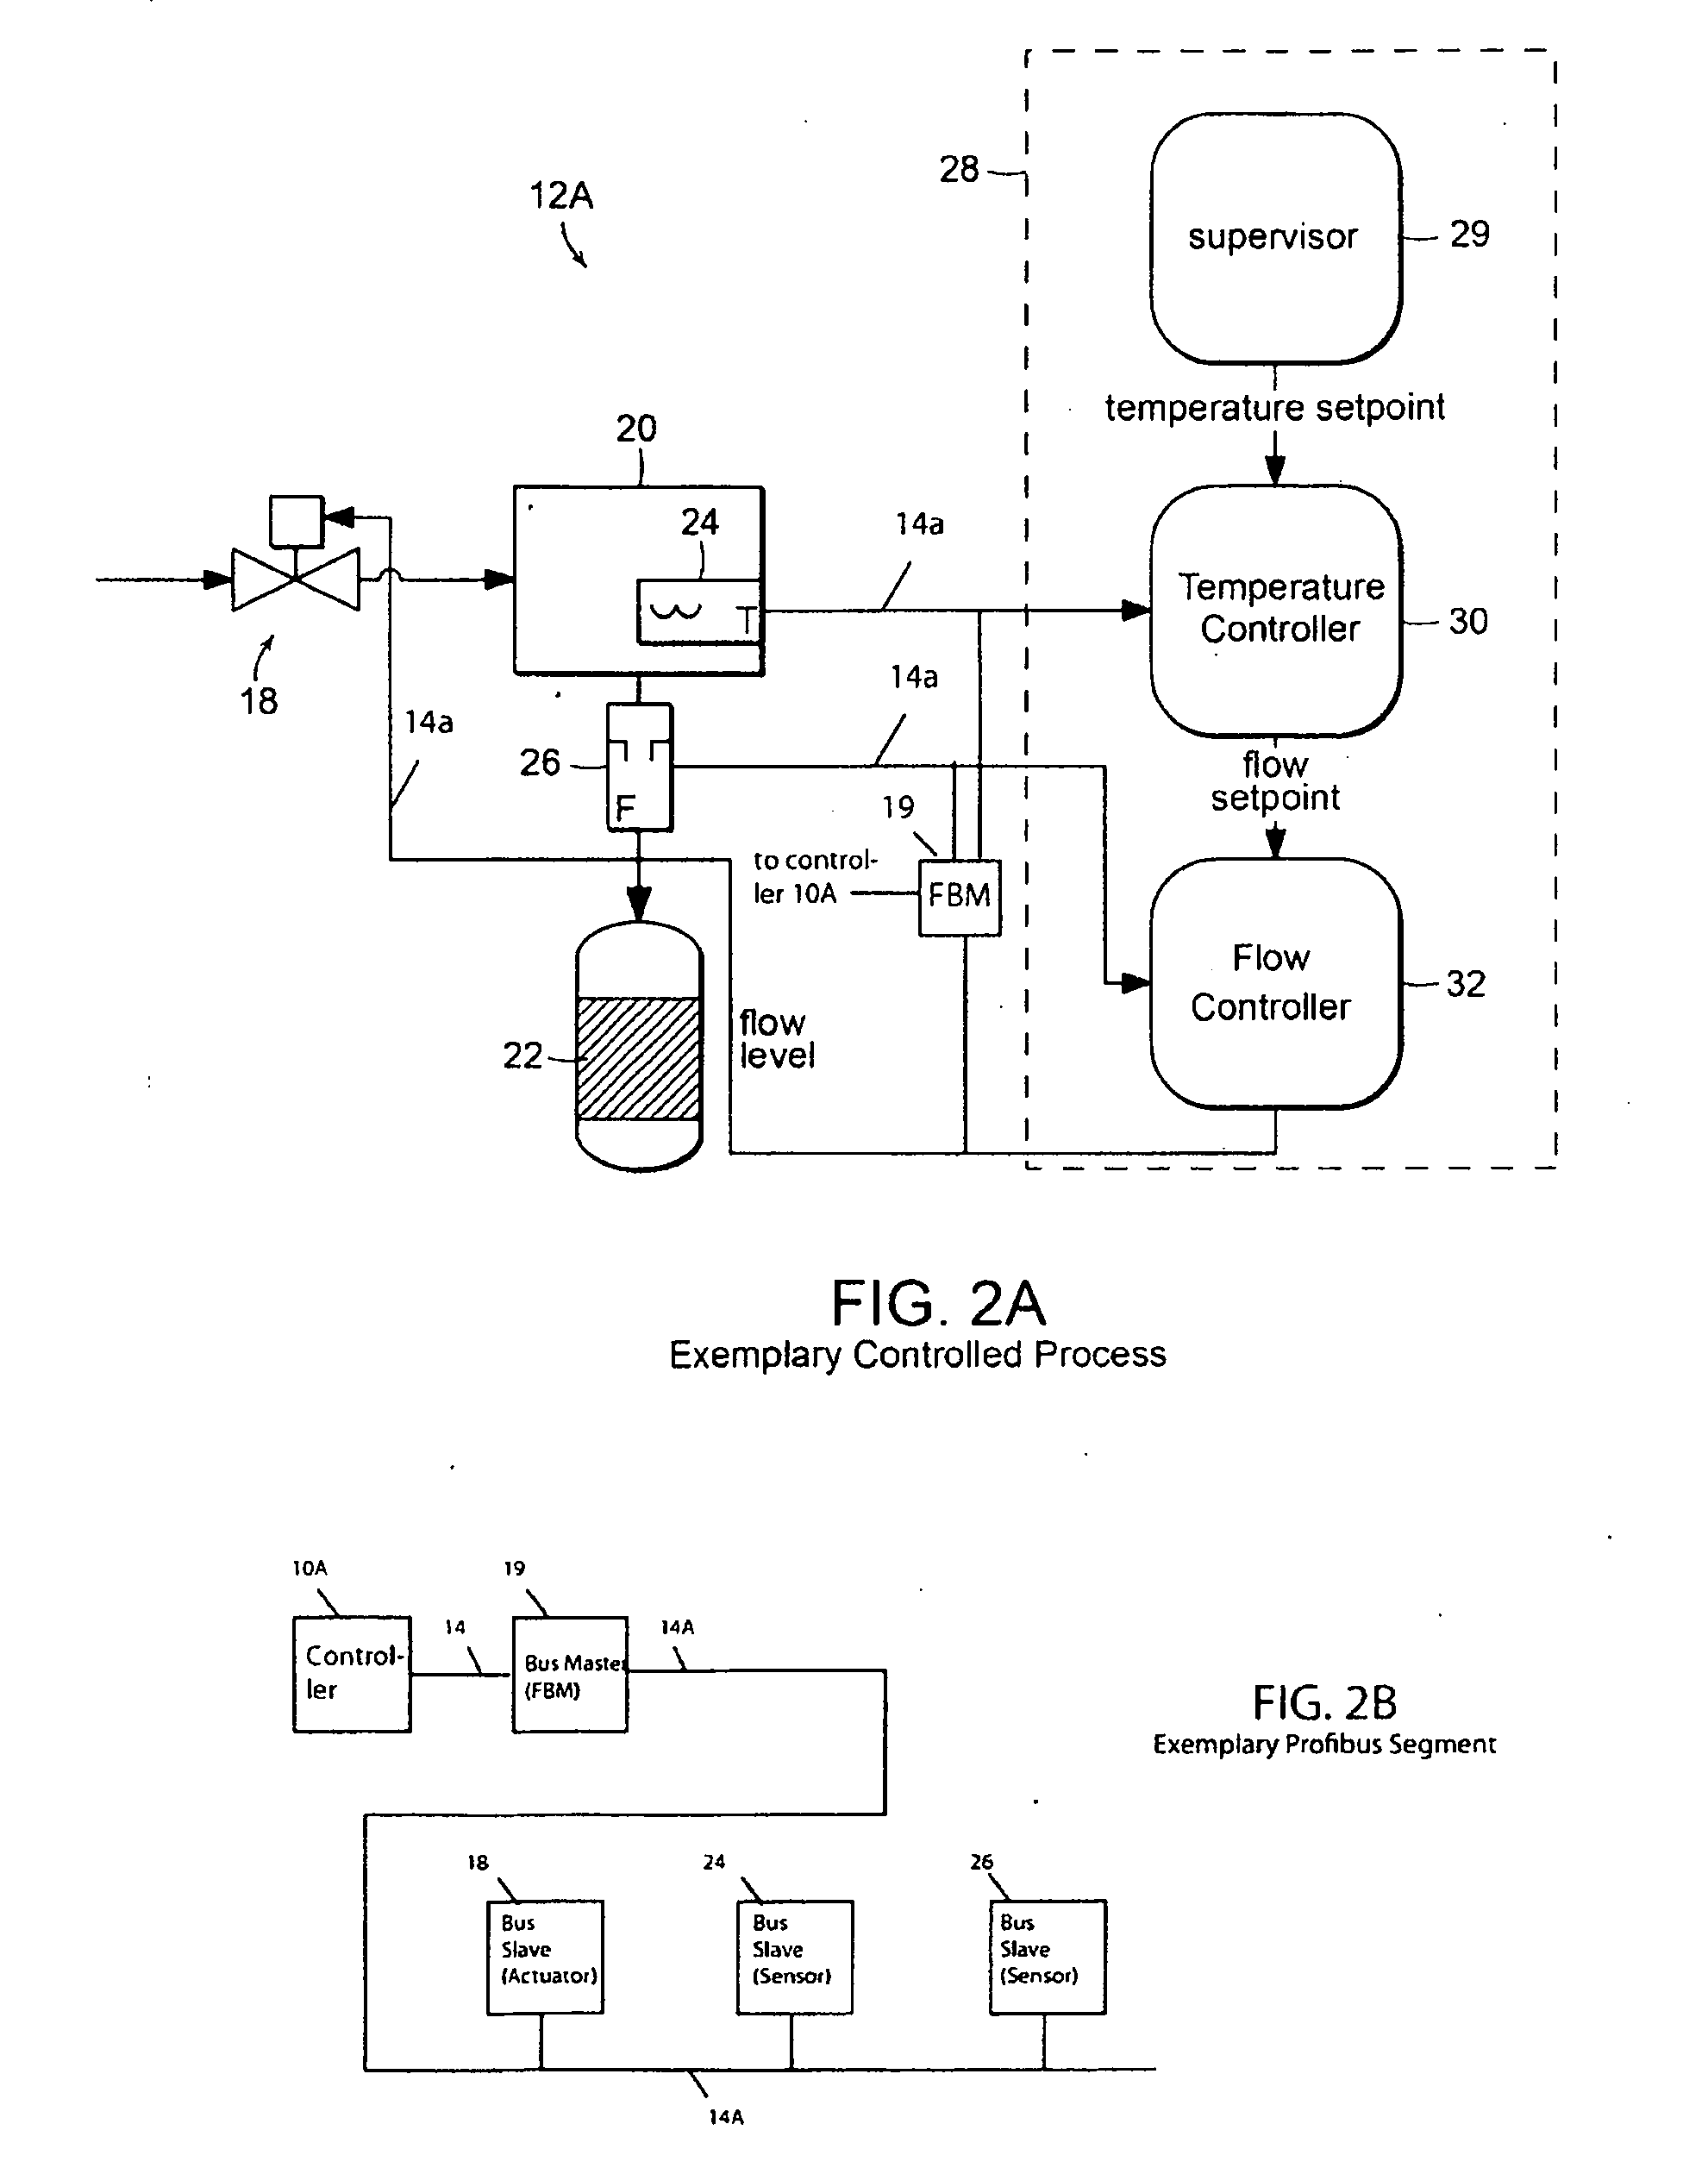 Methods and apparatus for control configuration with control objects that are fieldbus protocol-aware